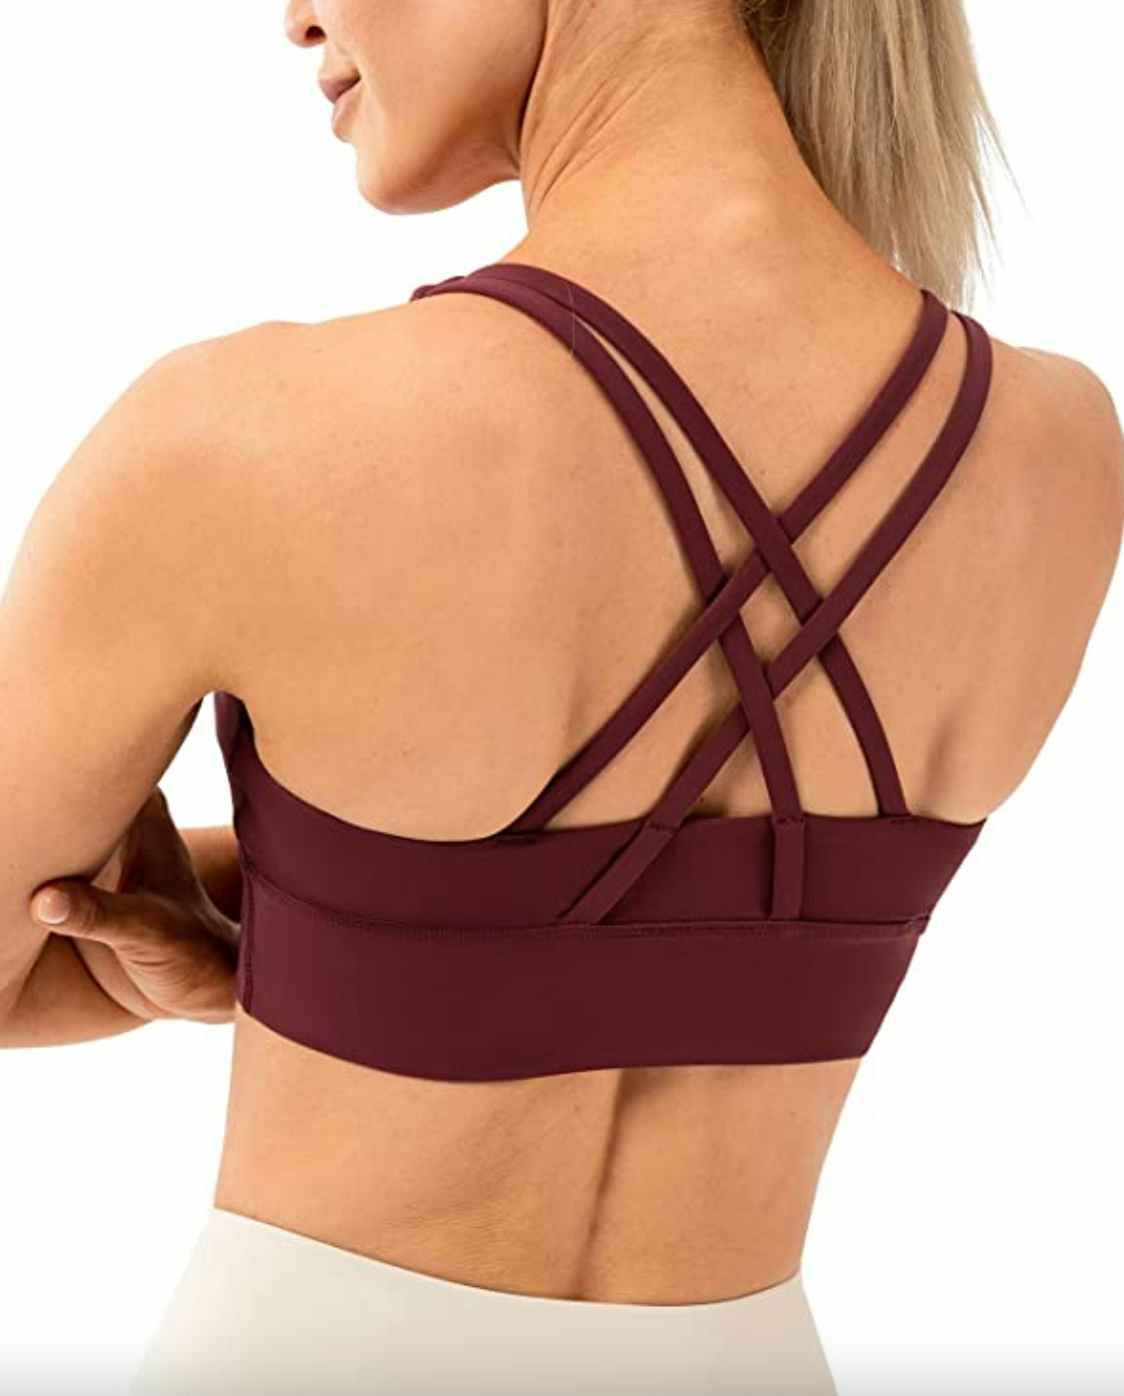 Stay stylish and supported with Lavento Women's Longline Sports Bra